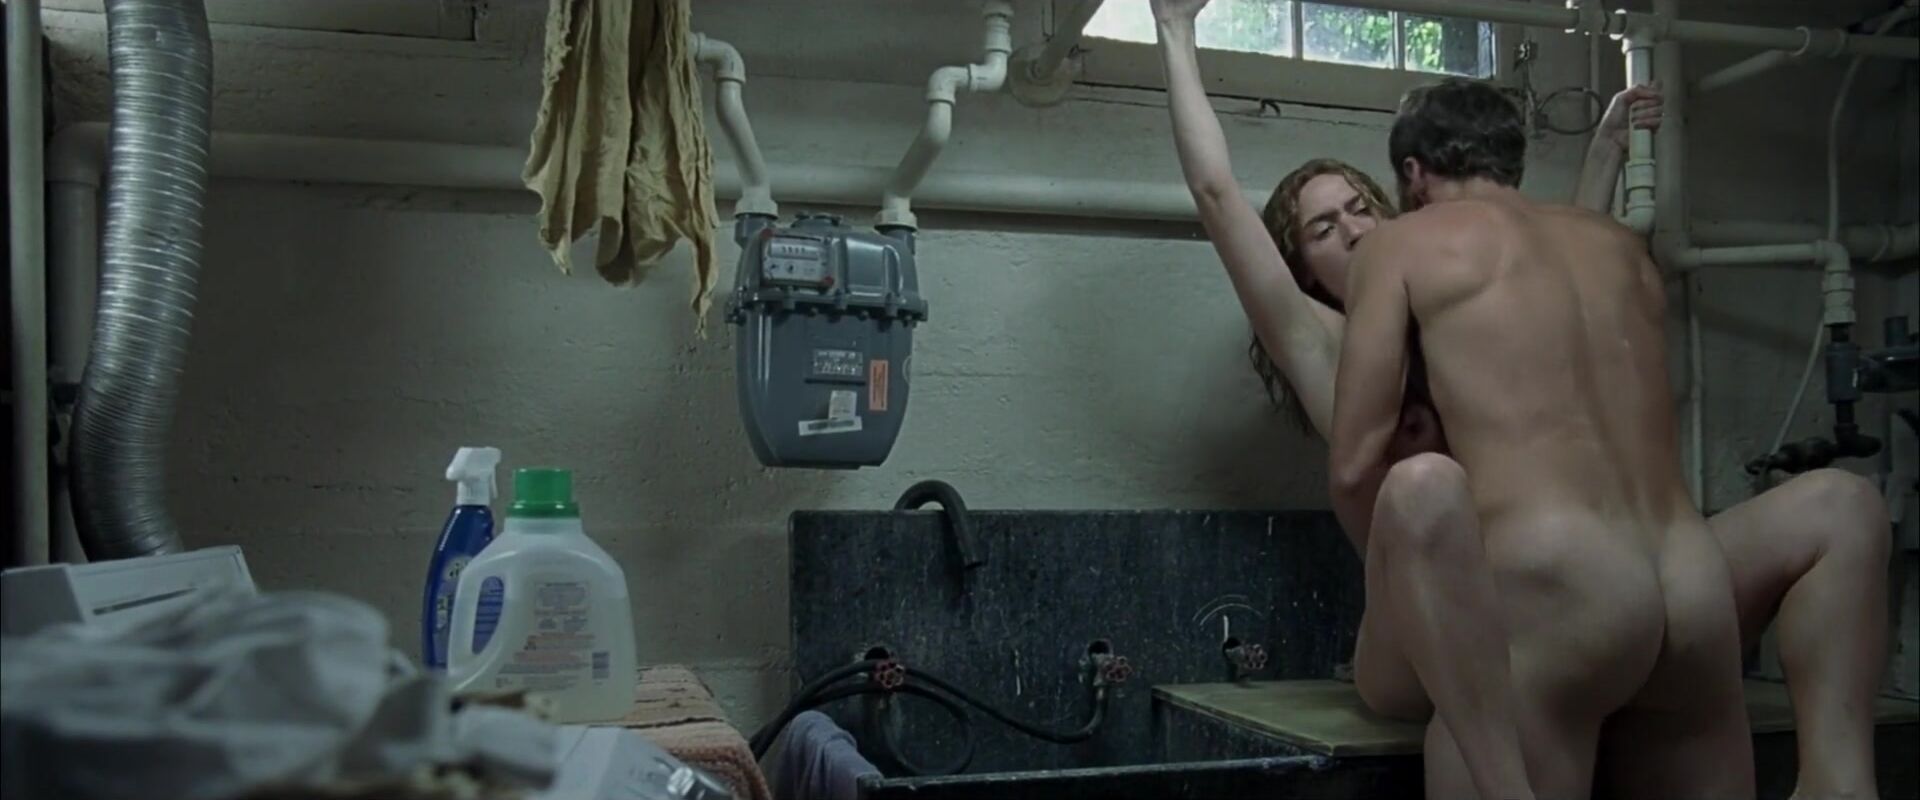 Porzo Little C celebrity Kate Winslet is fucked by Patrick Wilson in their cabin (2006) Bus - 2